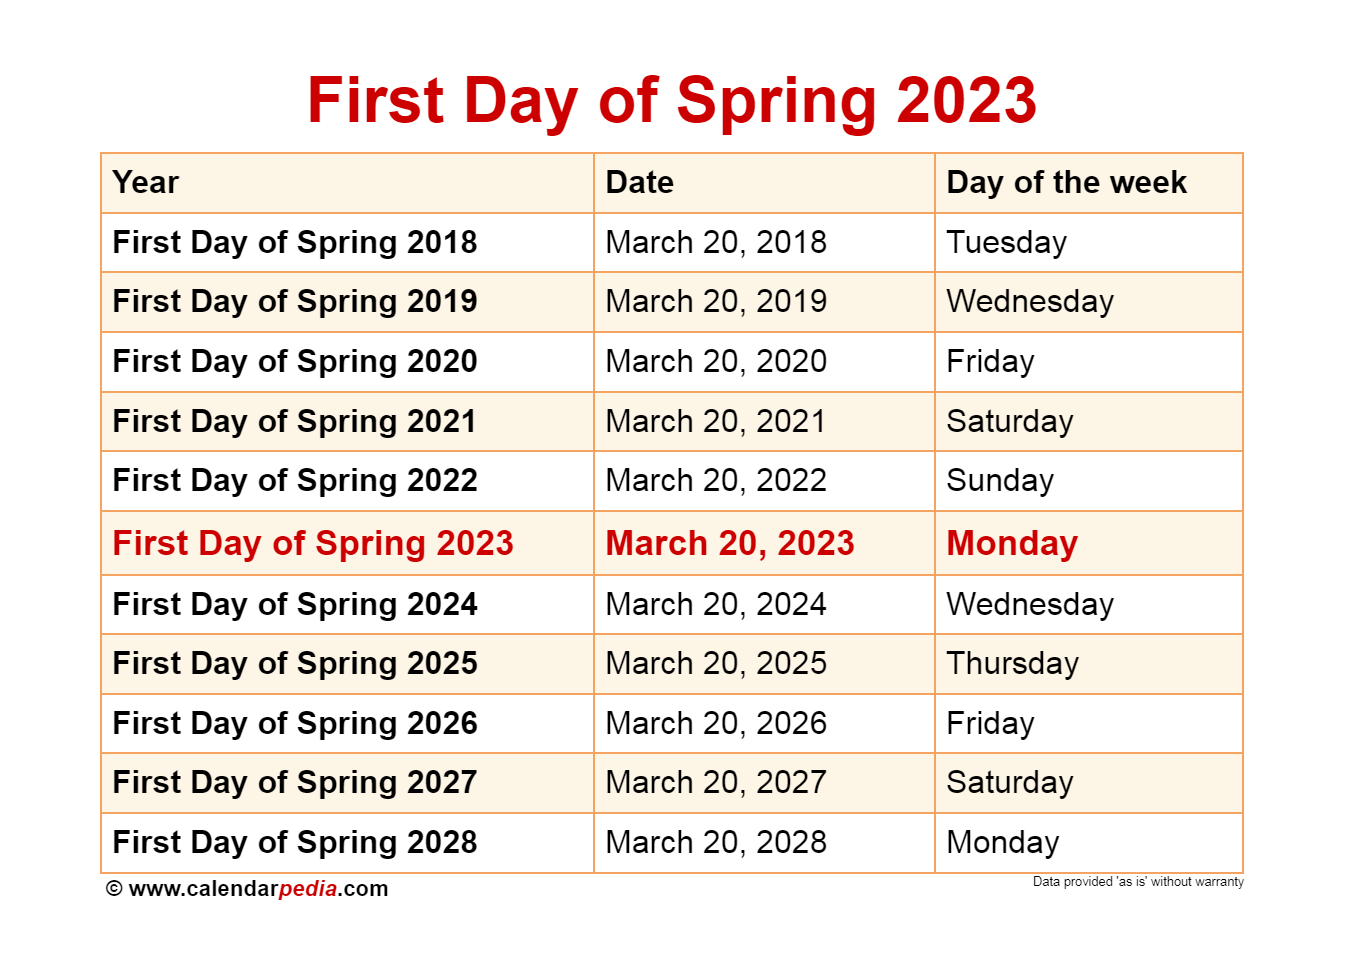 When is the First Day of Spring 2023?